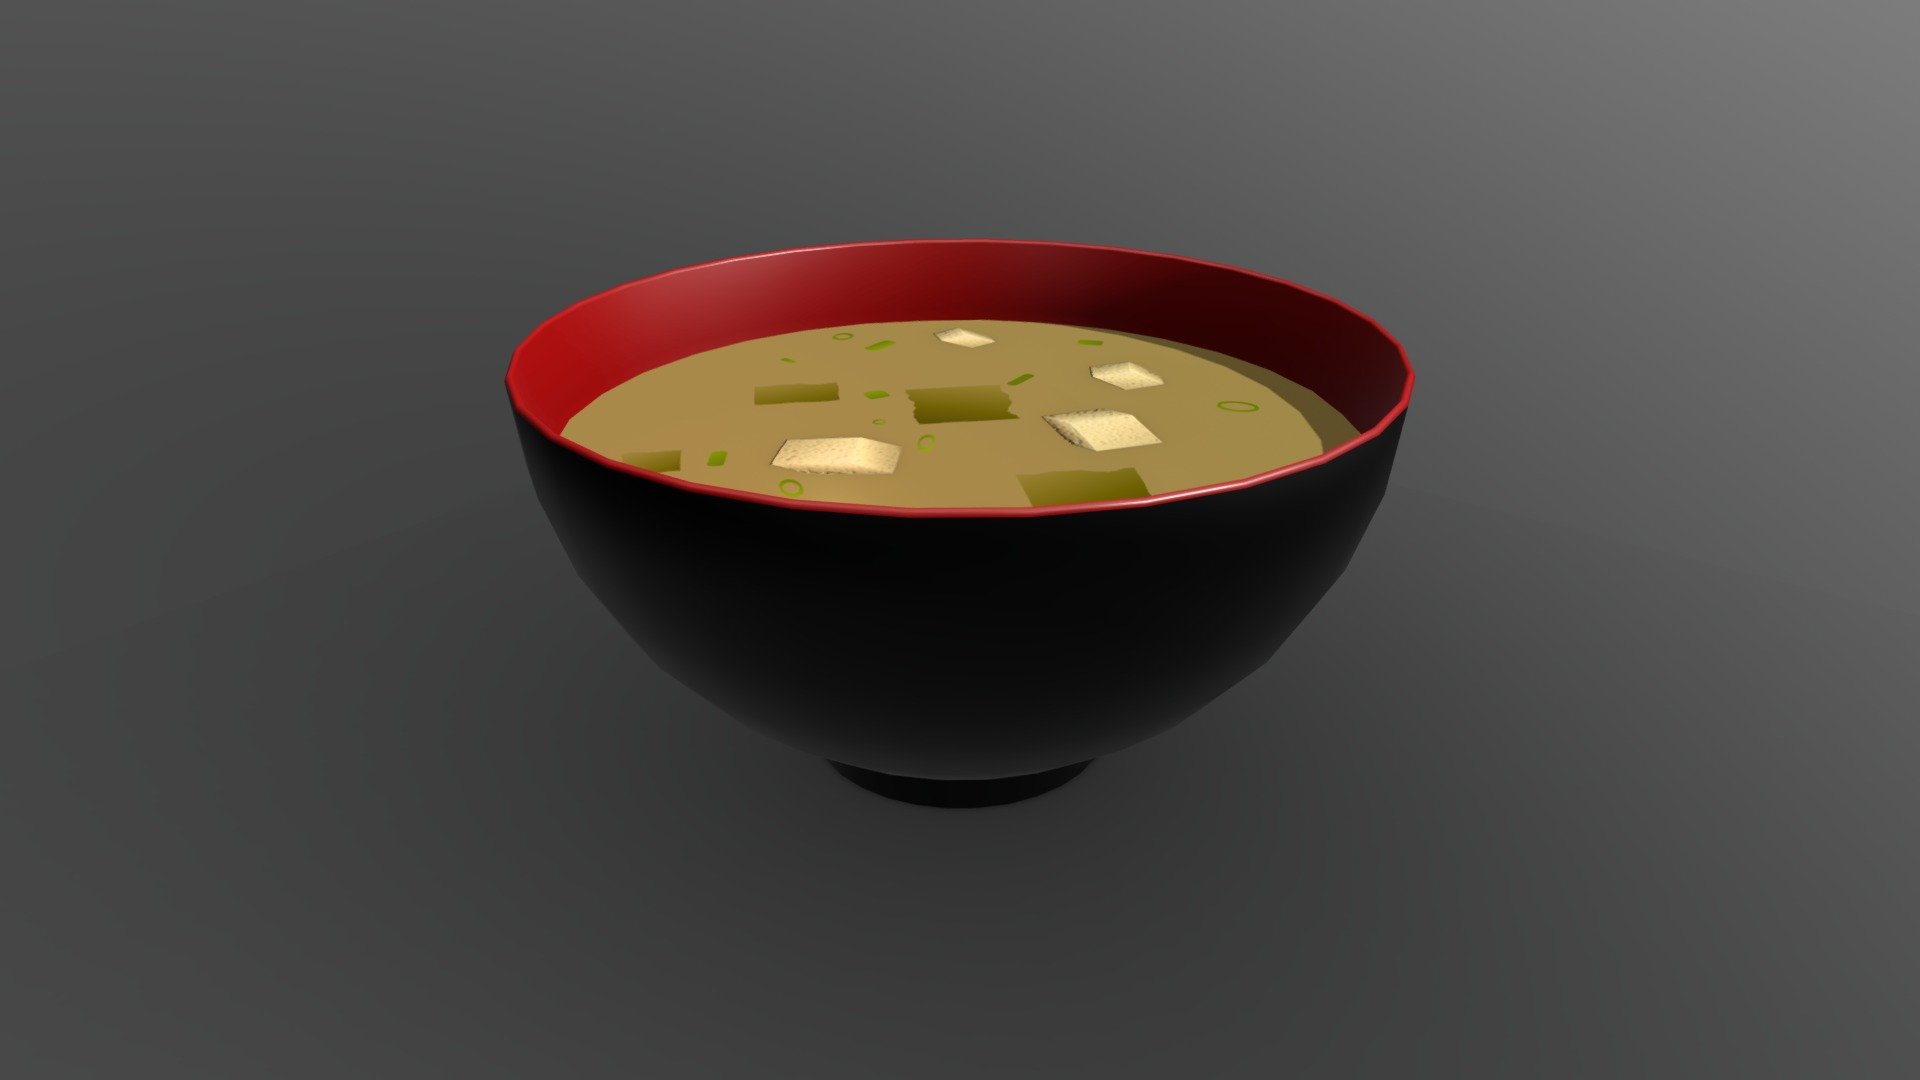 A bowl of a delicious and warm missoshiru or &ldquo;miso soup